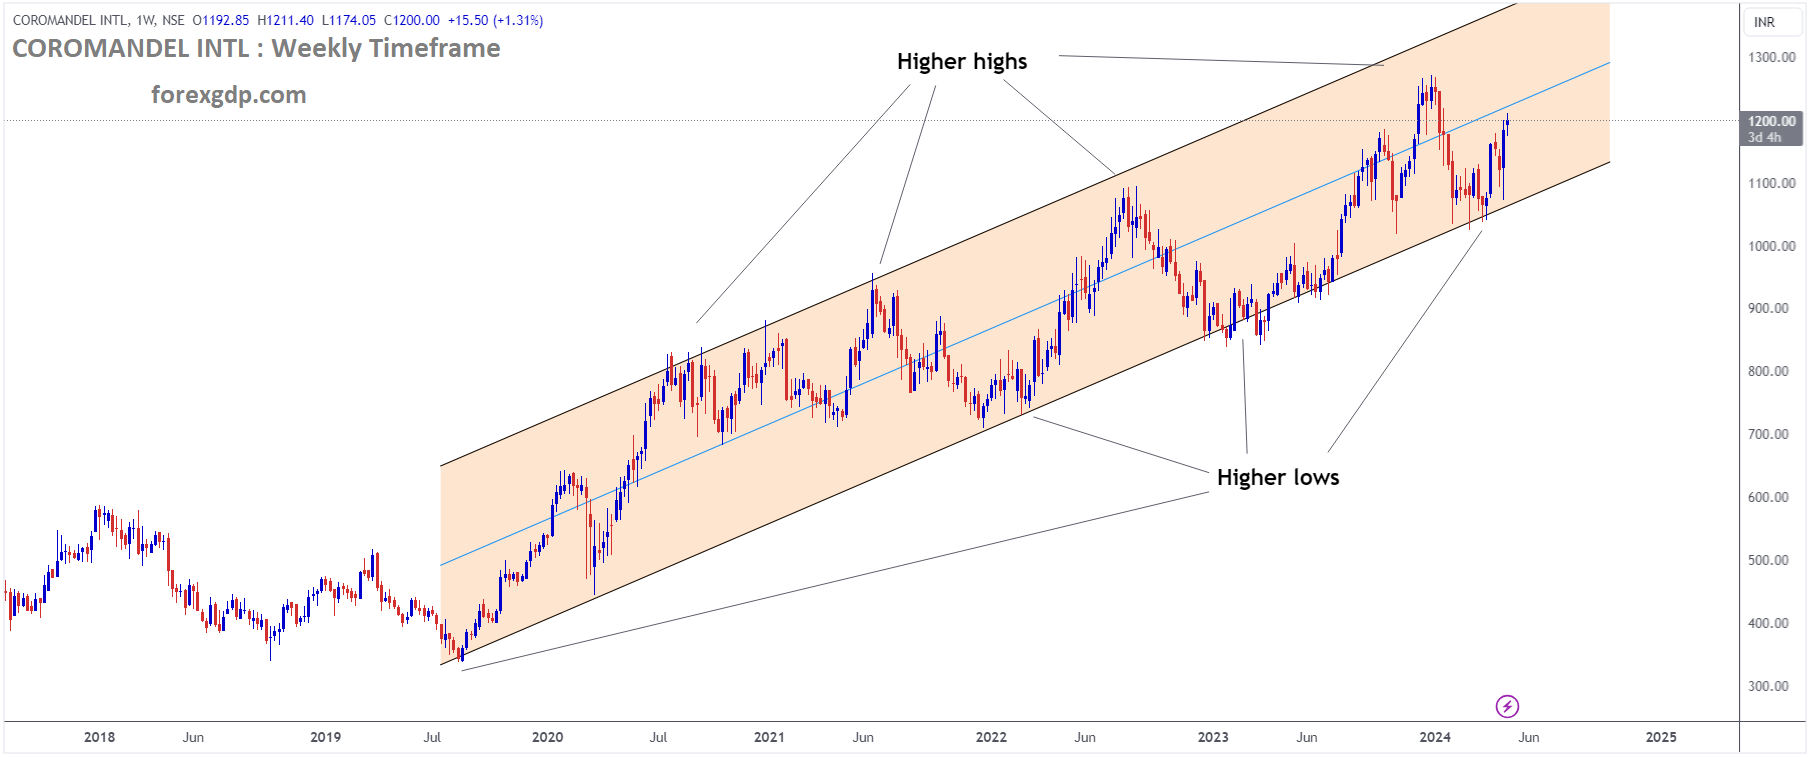 COROMANDEL INTL Market Price is moving in Ascending channel and market has rebounded from the higher low area of the channel